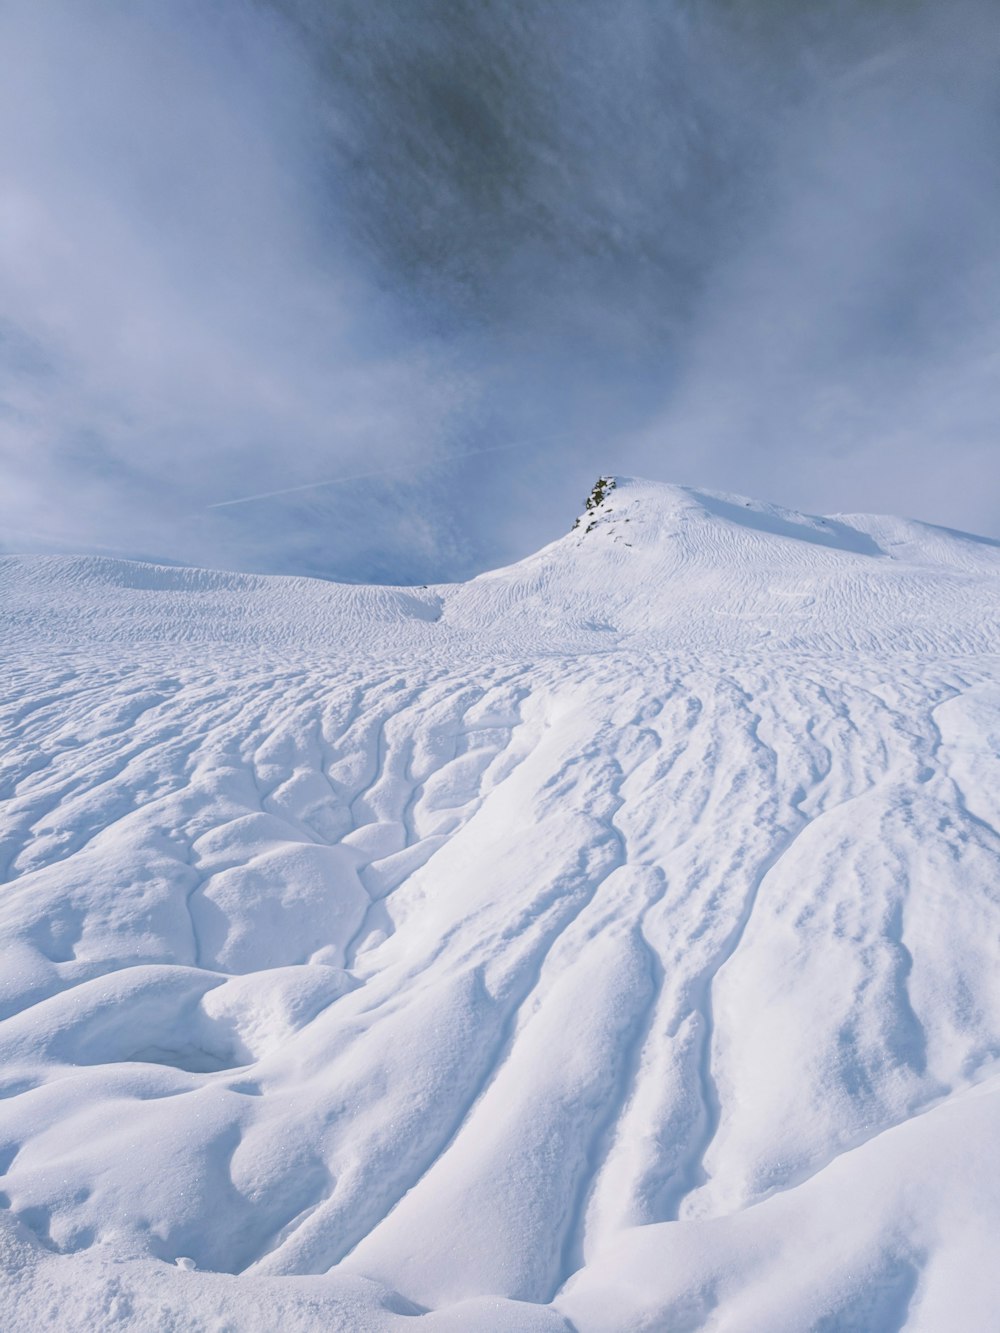 a person riding skis on top of a snow covered slope